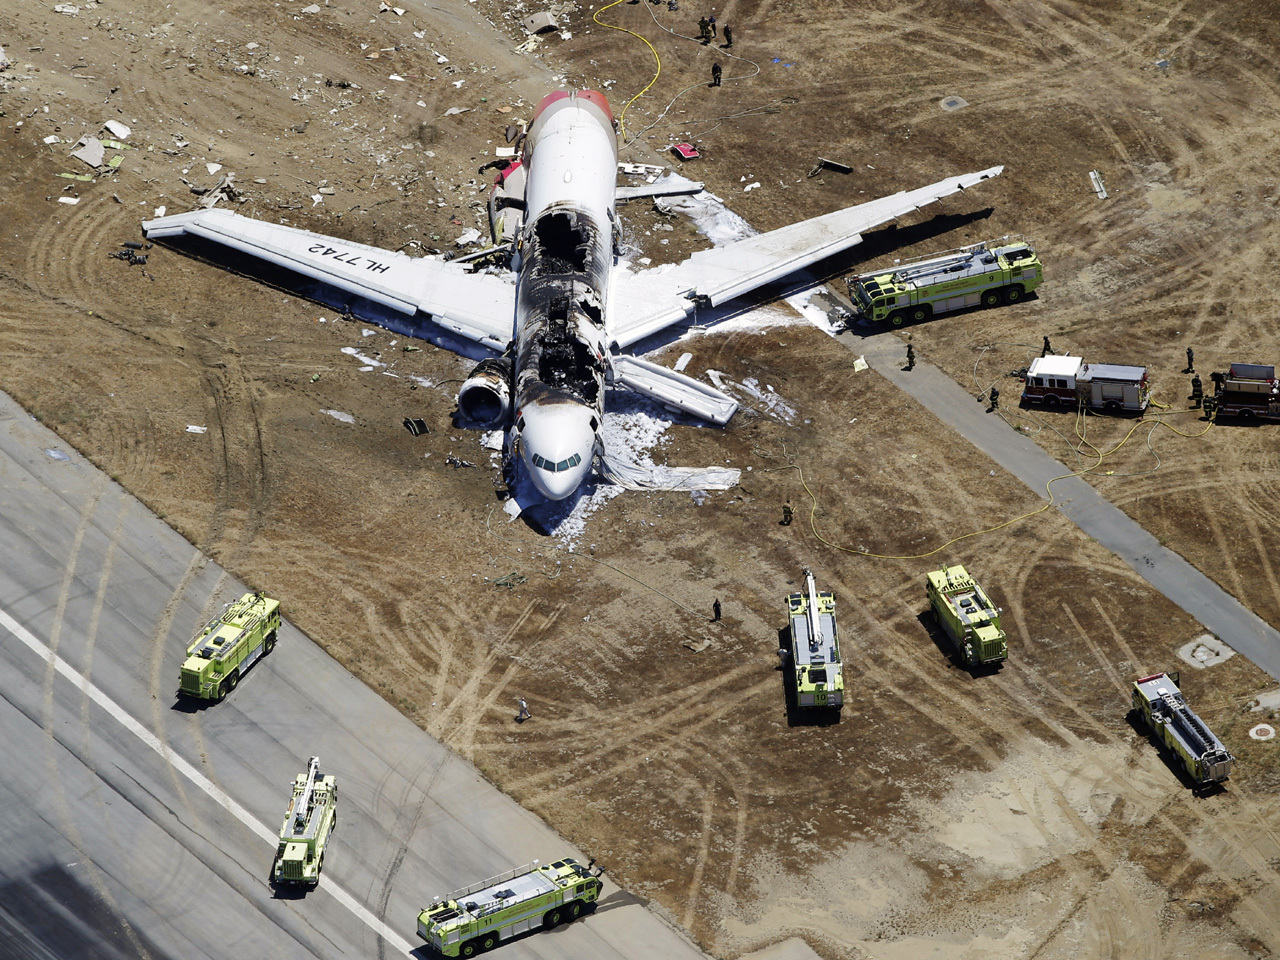 Plane Crash: A Comprehensive Exploration of Causes, Impacts, and Safety Measures